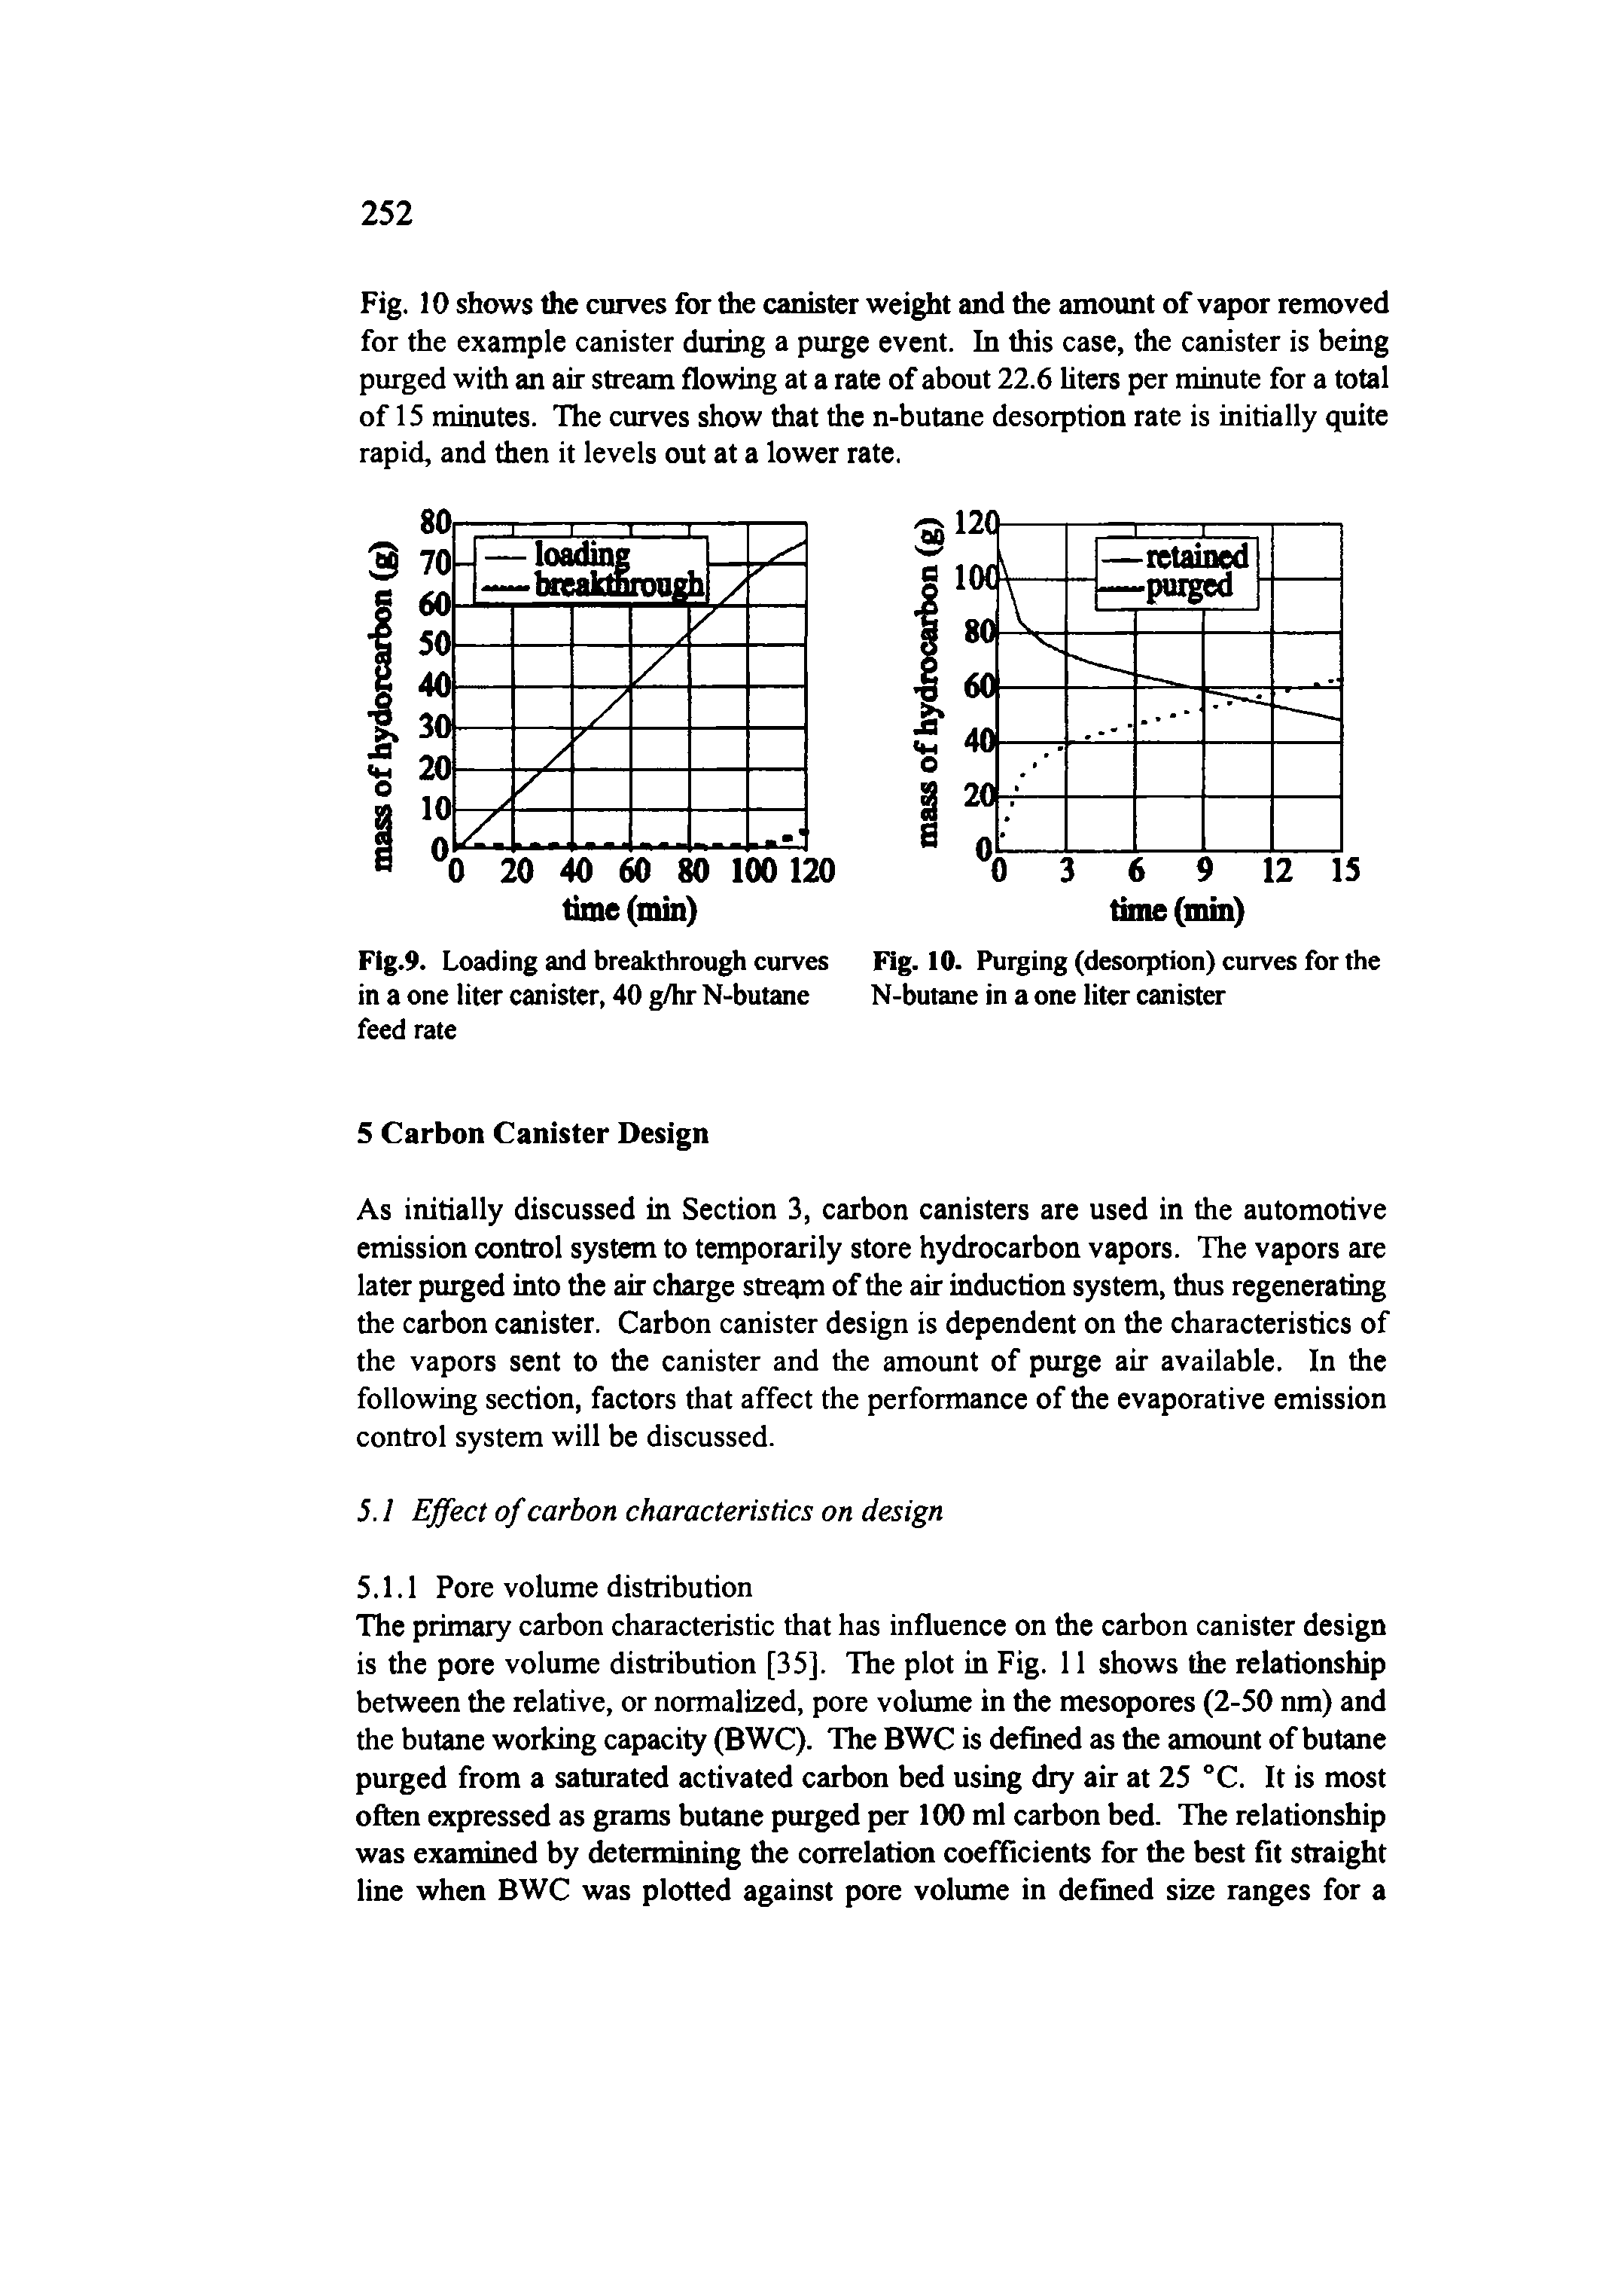 Fig.9. Loading and breakthrough curves Fig. 10. Purging (desorption) curves for the in a one liter canister, 40 g/hr N-butane N-butane in a one liter canister feed rate...